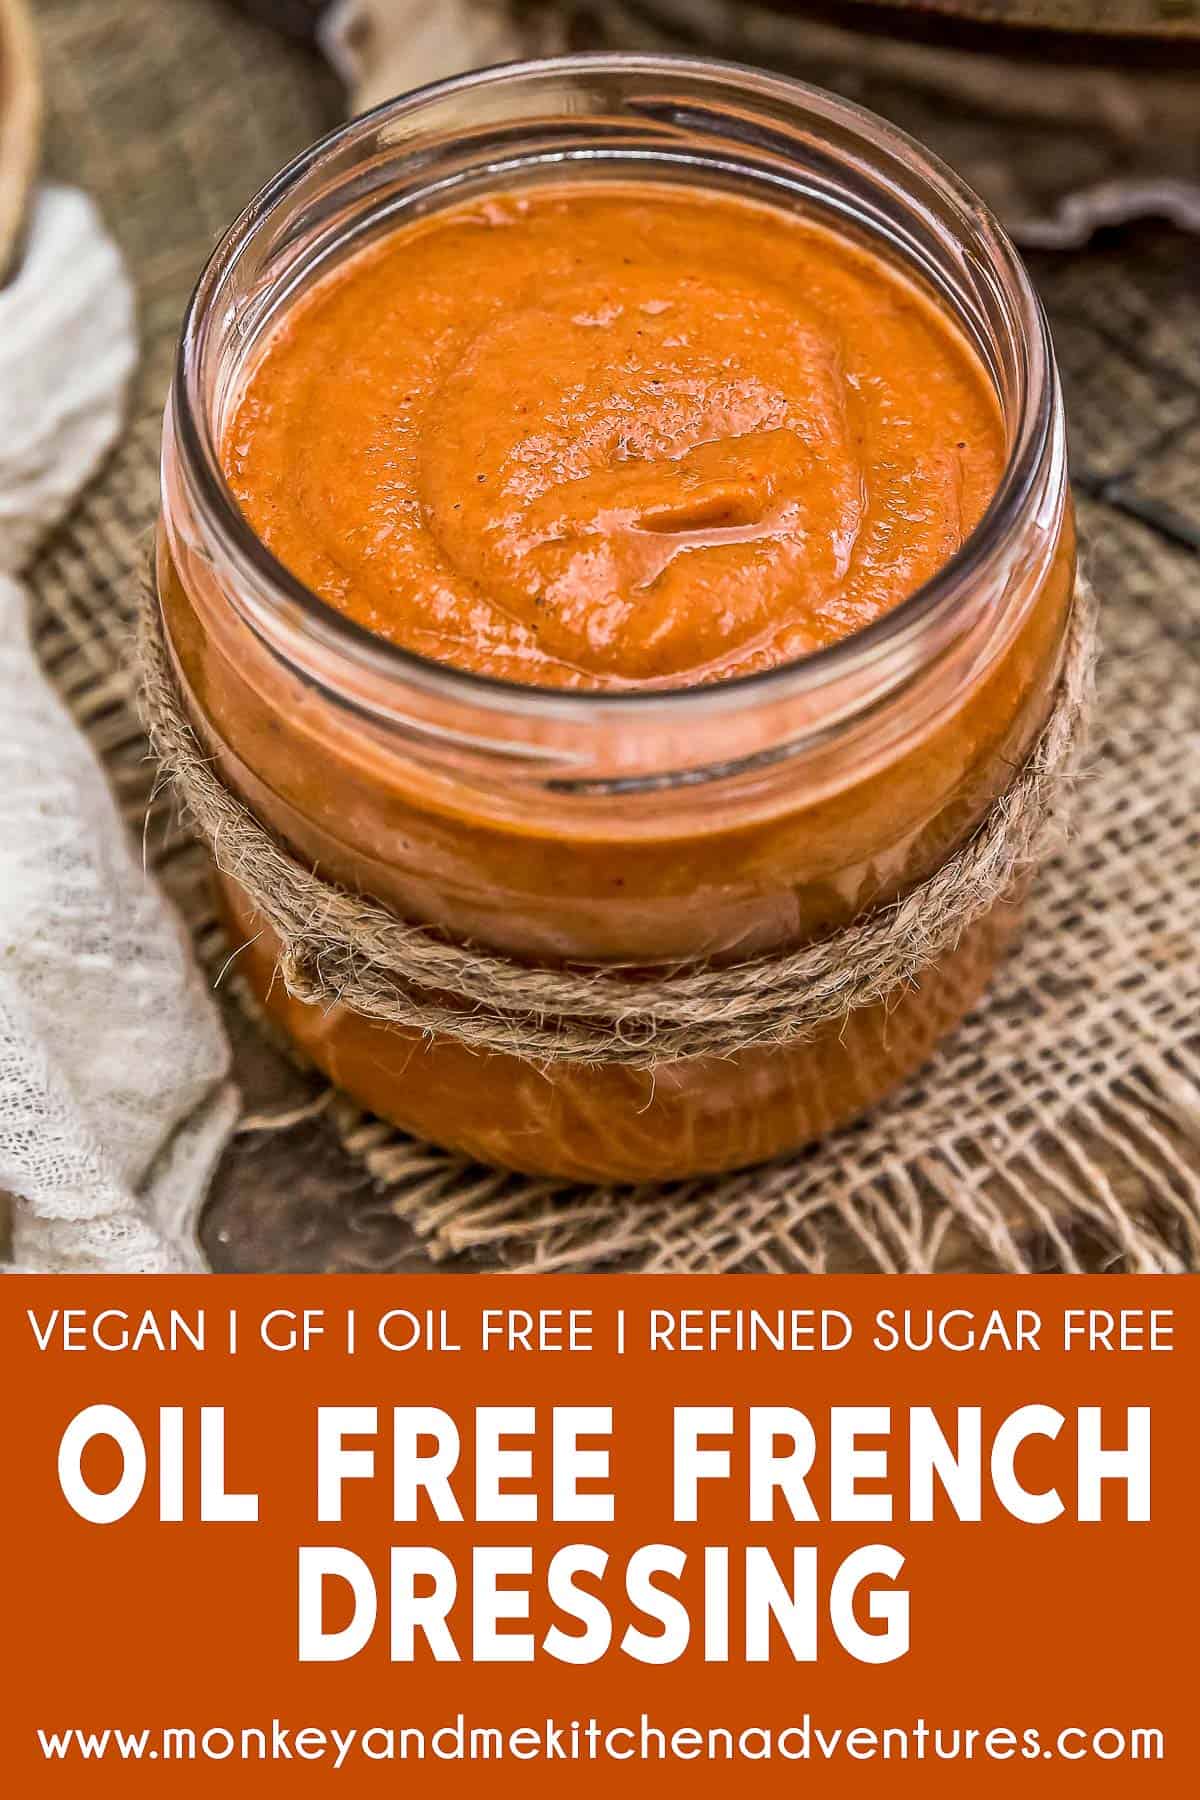 Oil Free French Dressing with text description